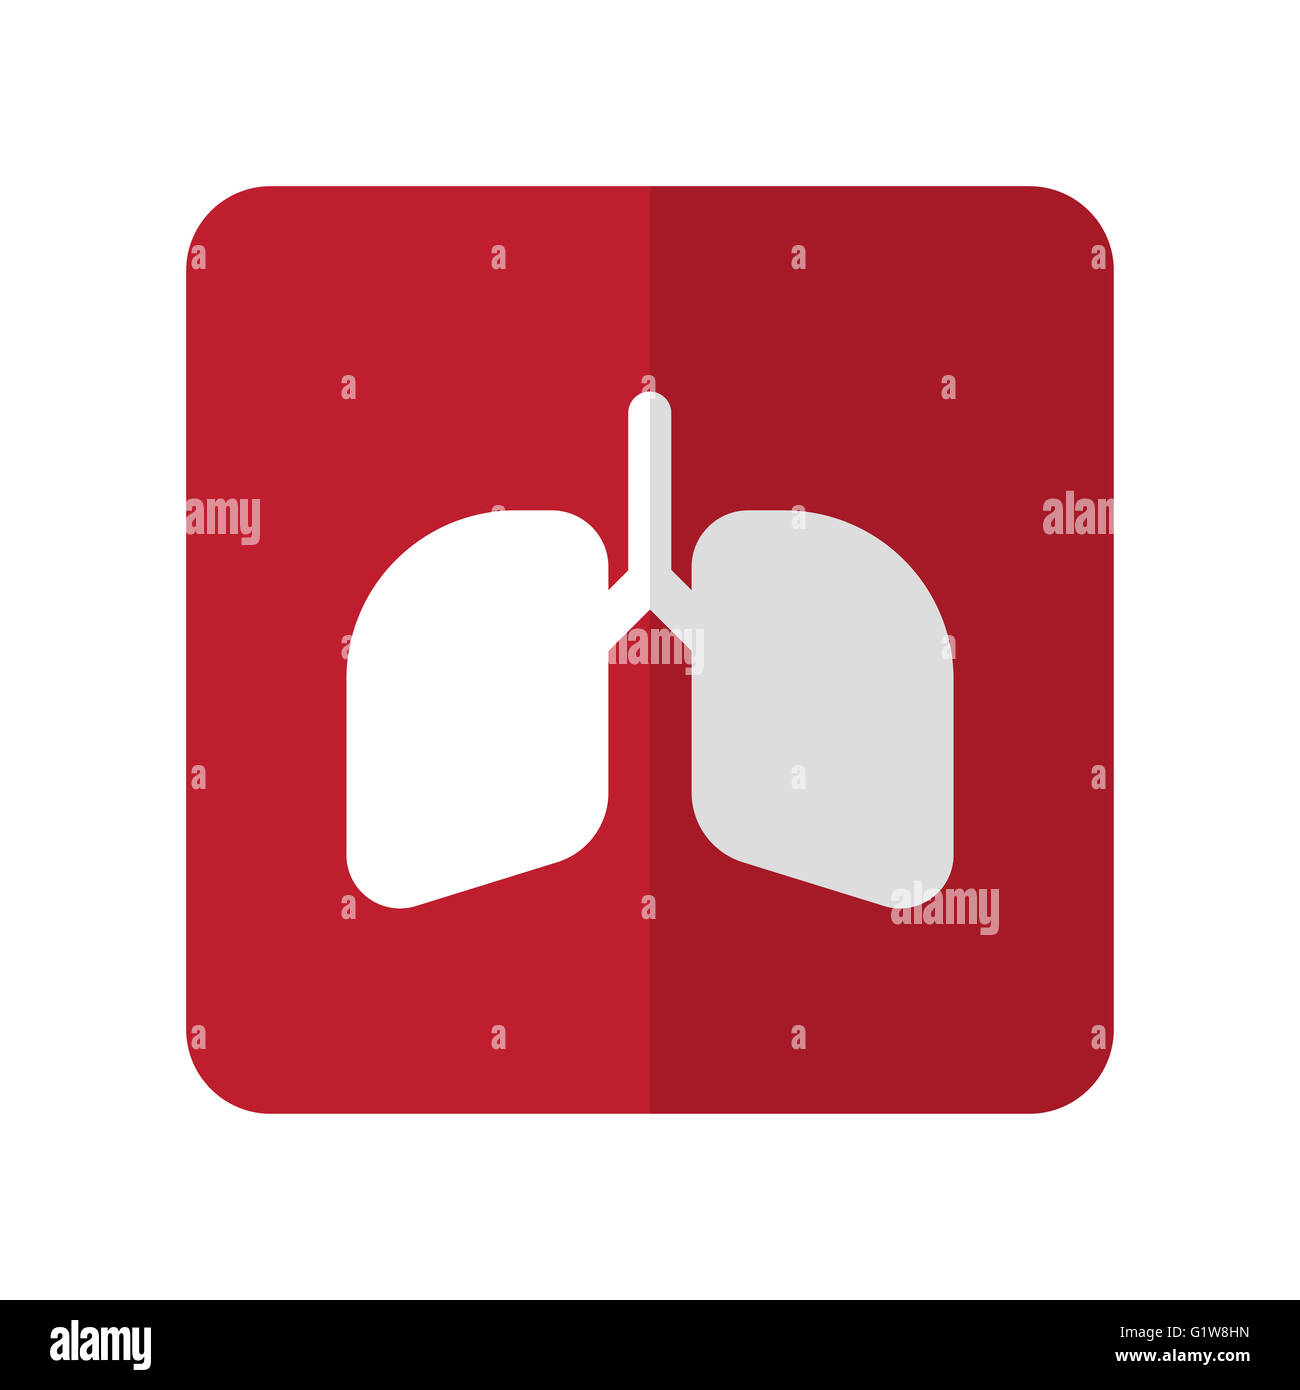 White Lungs flat icon on red rounded square on white Stock Photo